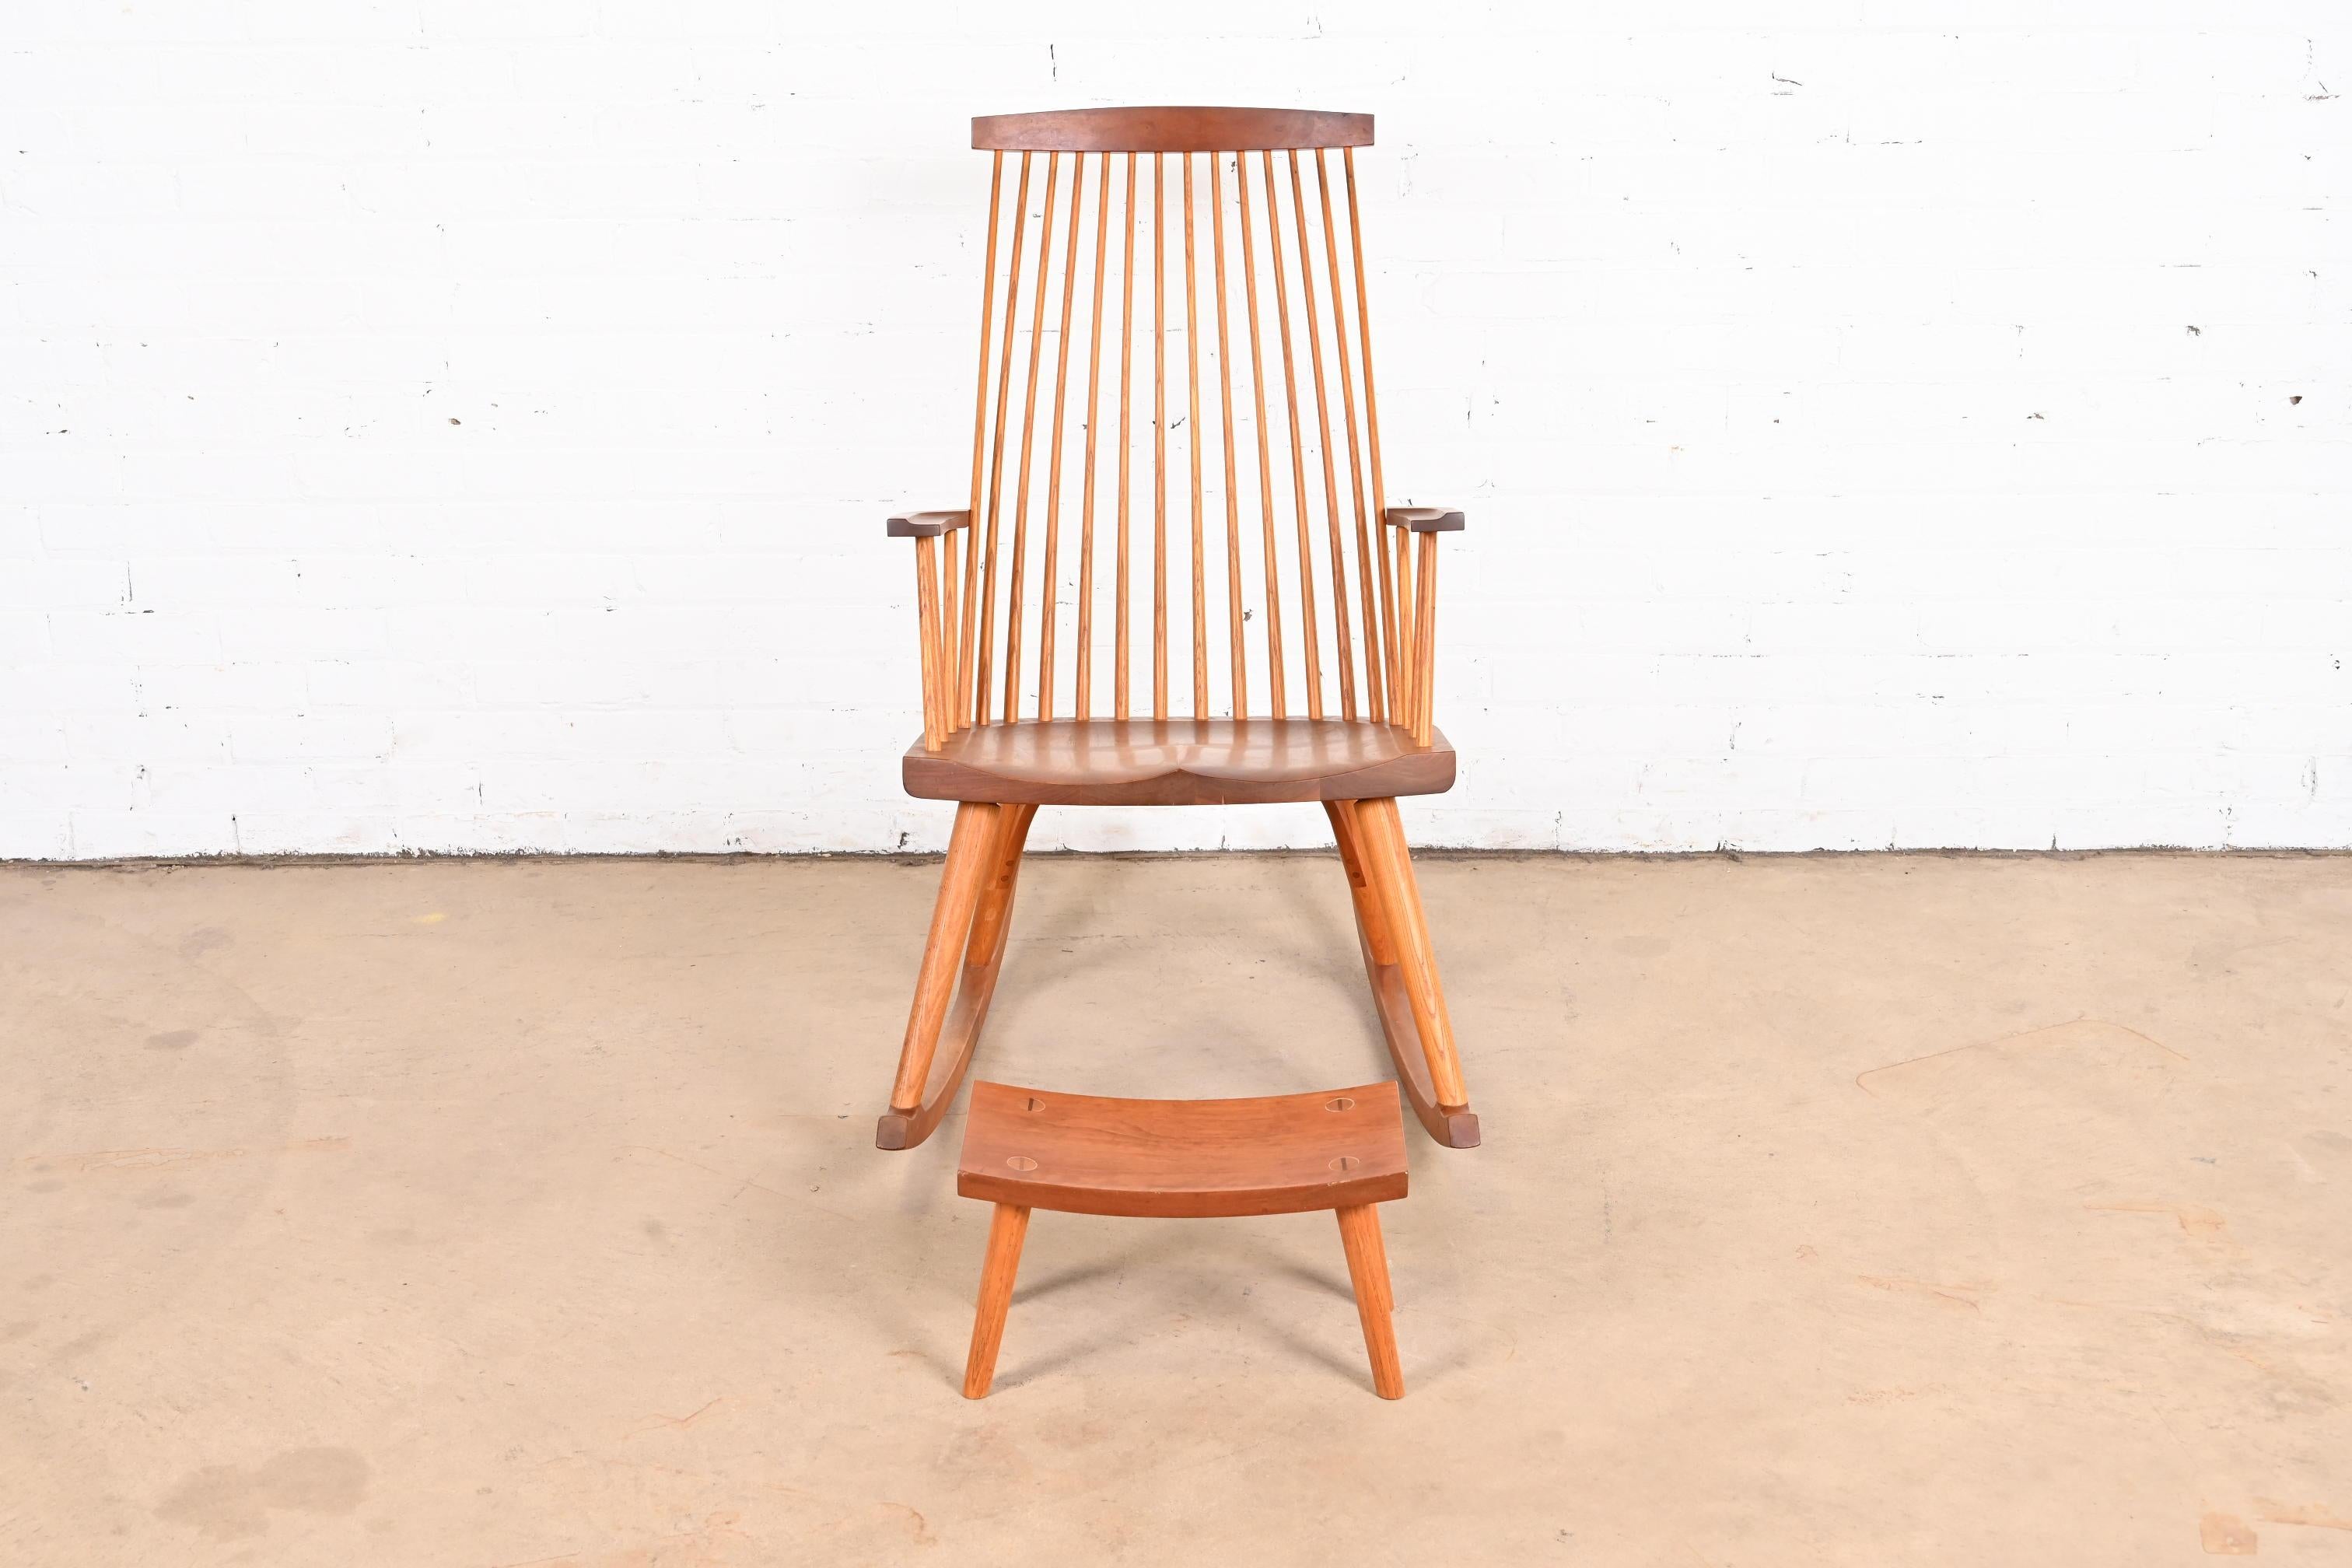 20th Century Thomas Moser Shaker Studio Crafted Cherry and Ash Rocking Chair with Footstool